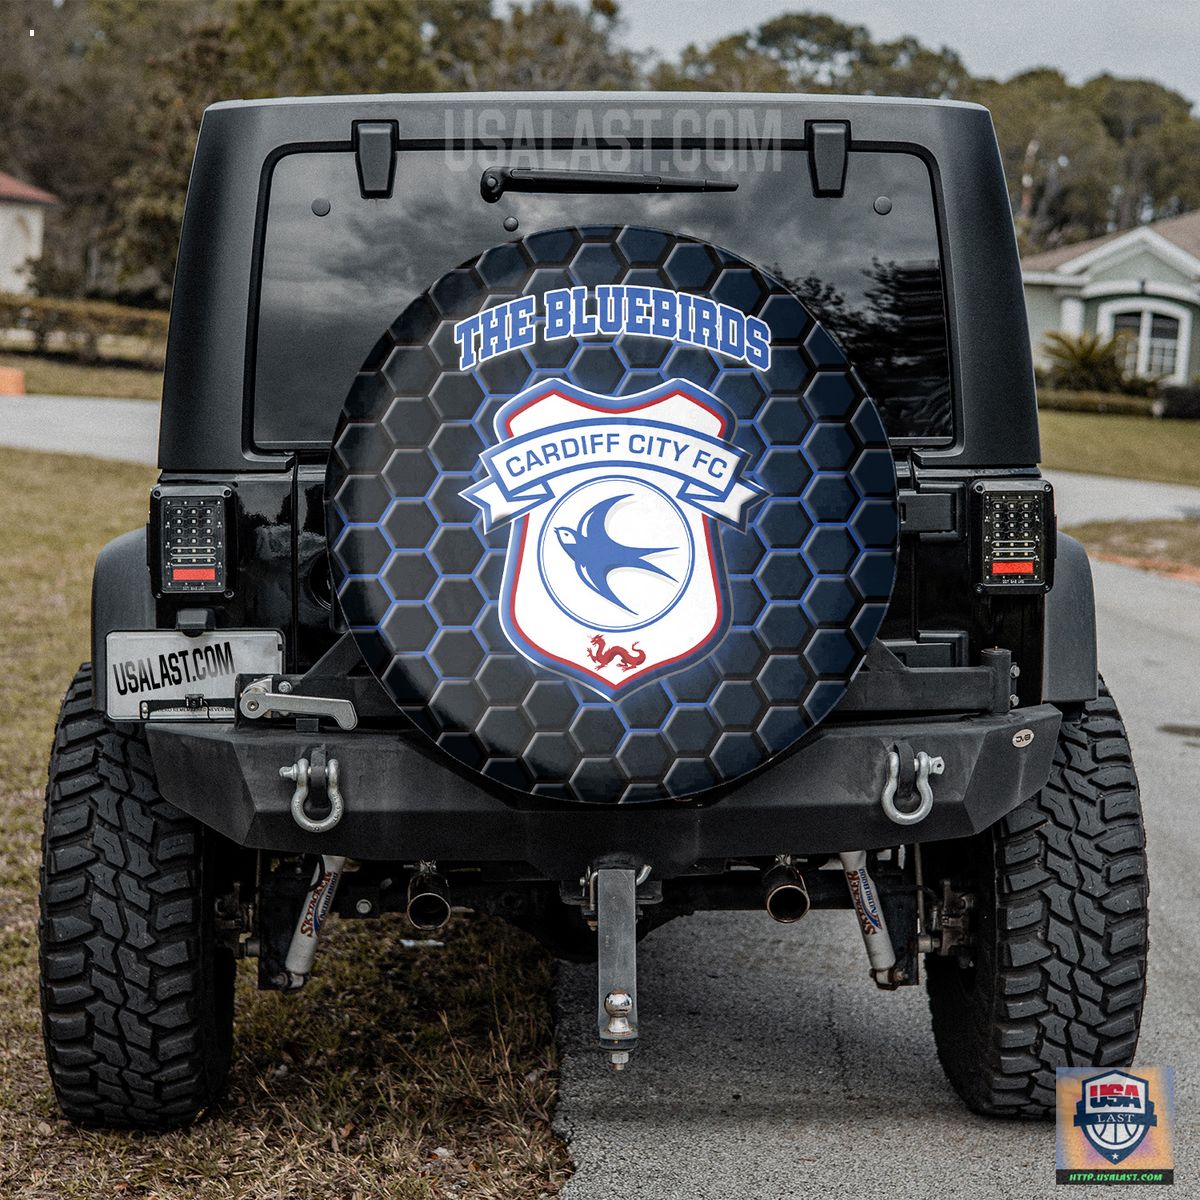 AMAZING Cardiff City FC Spare Tire Cover